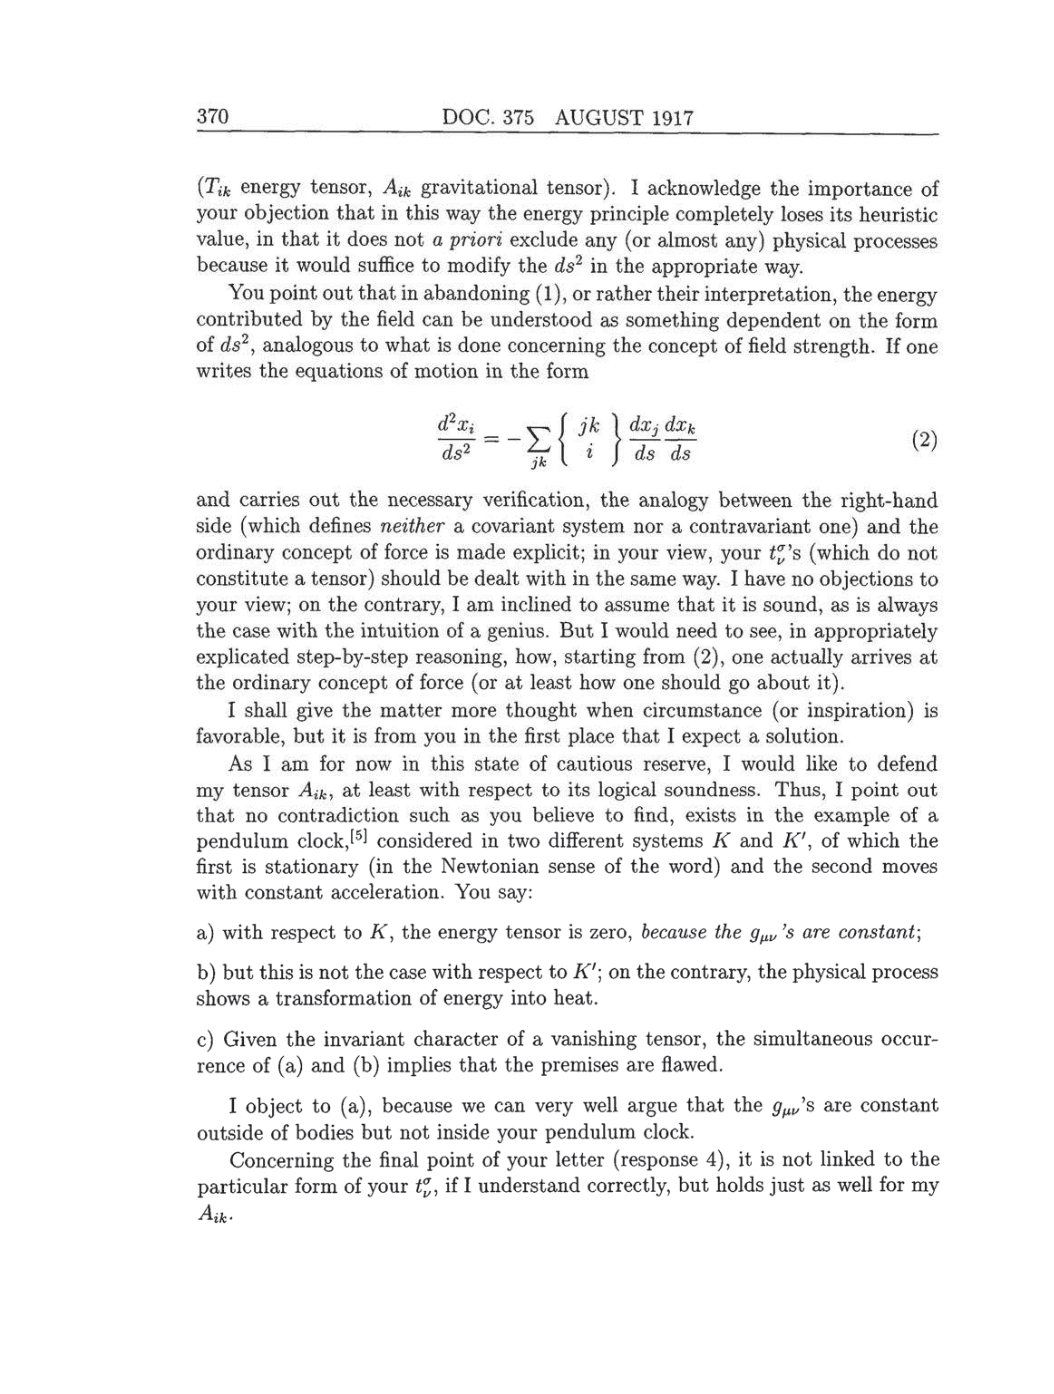 Volume 8: The Berlin Years: Correspondence, 1914-1918 (English translation supplement) page 370